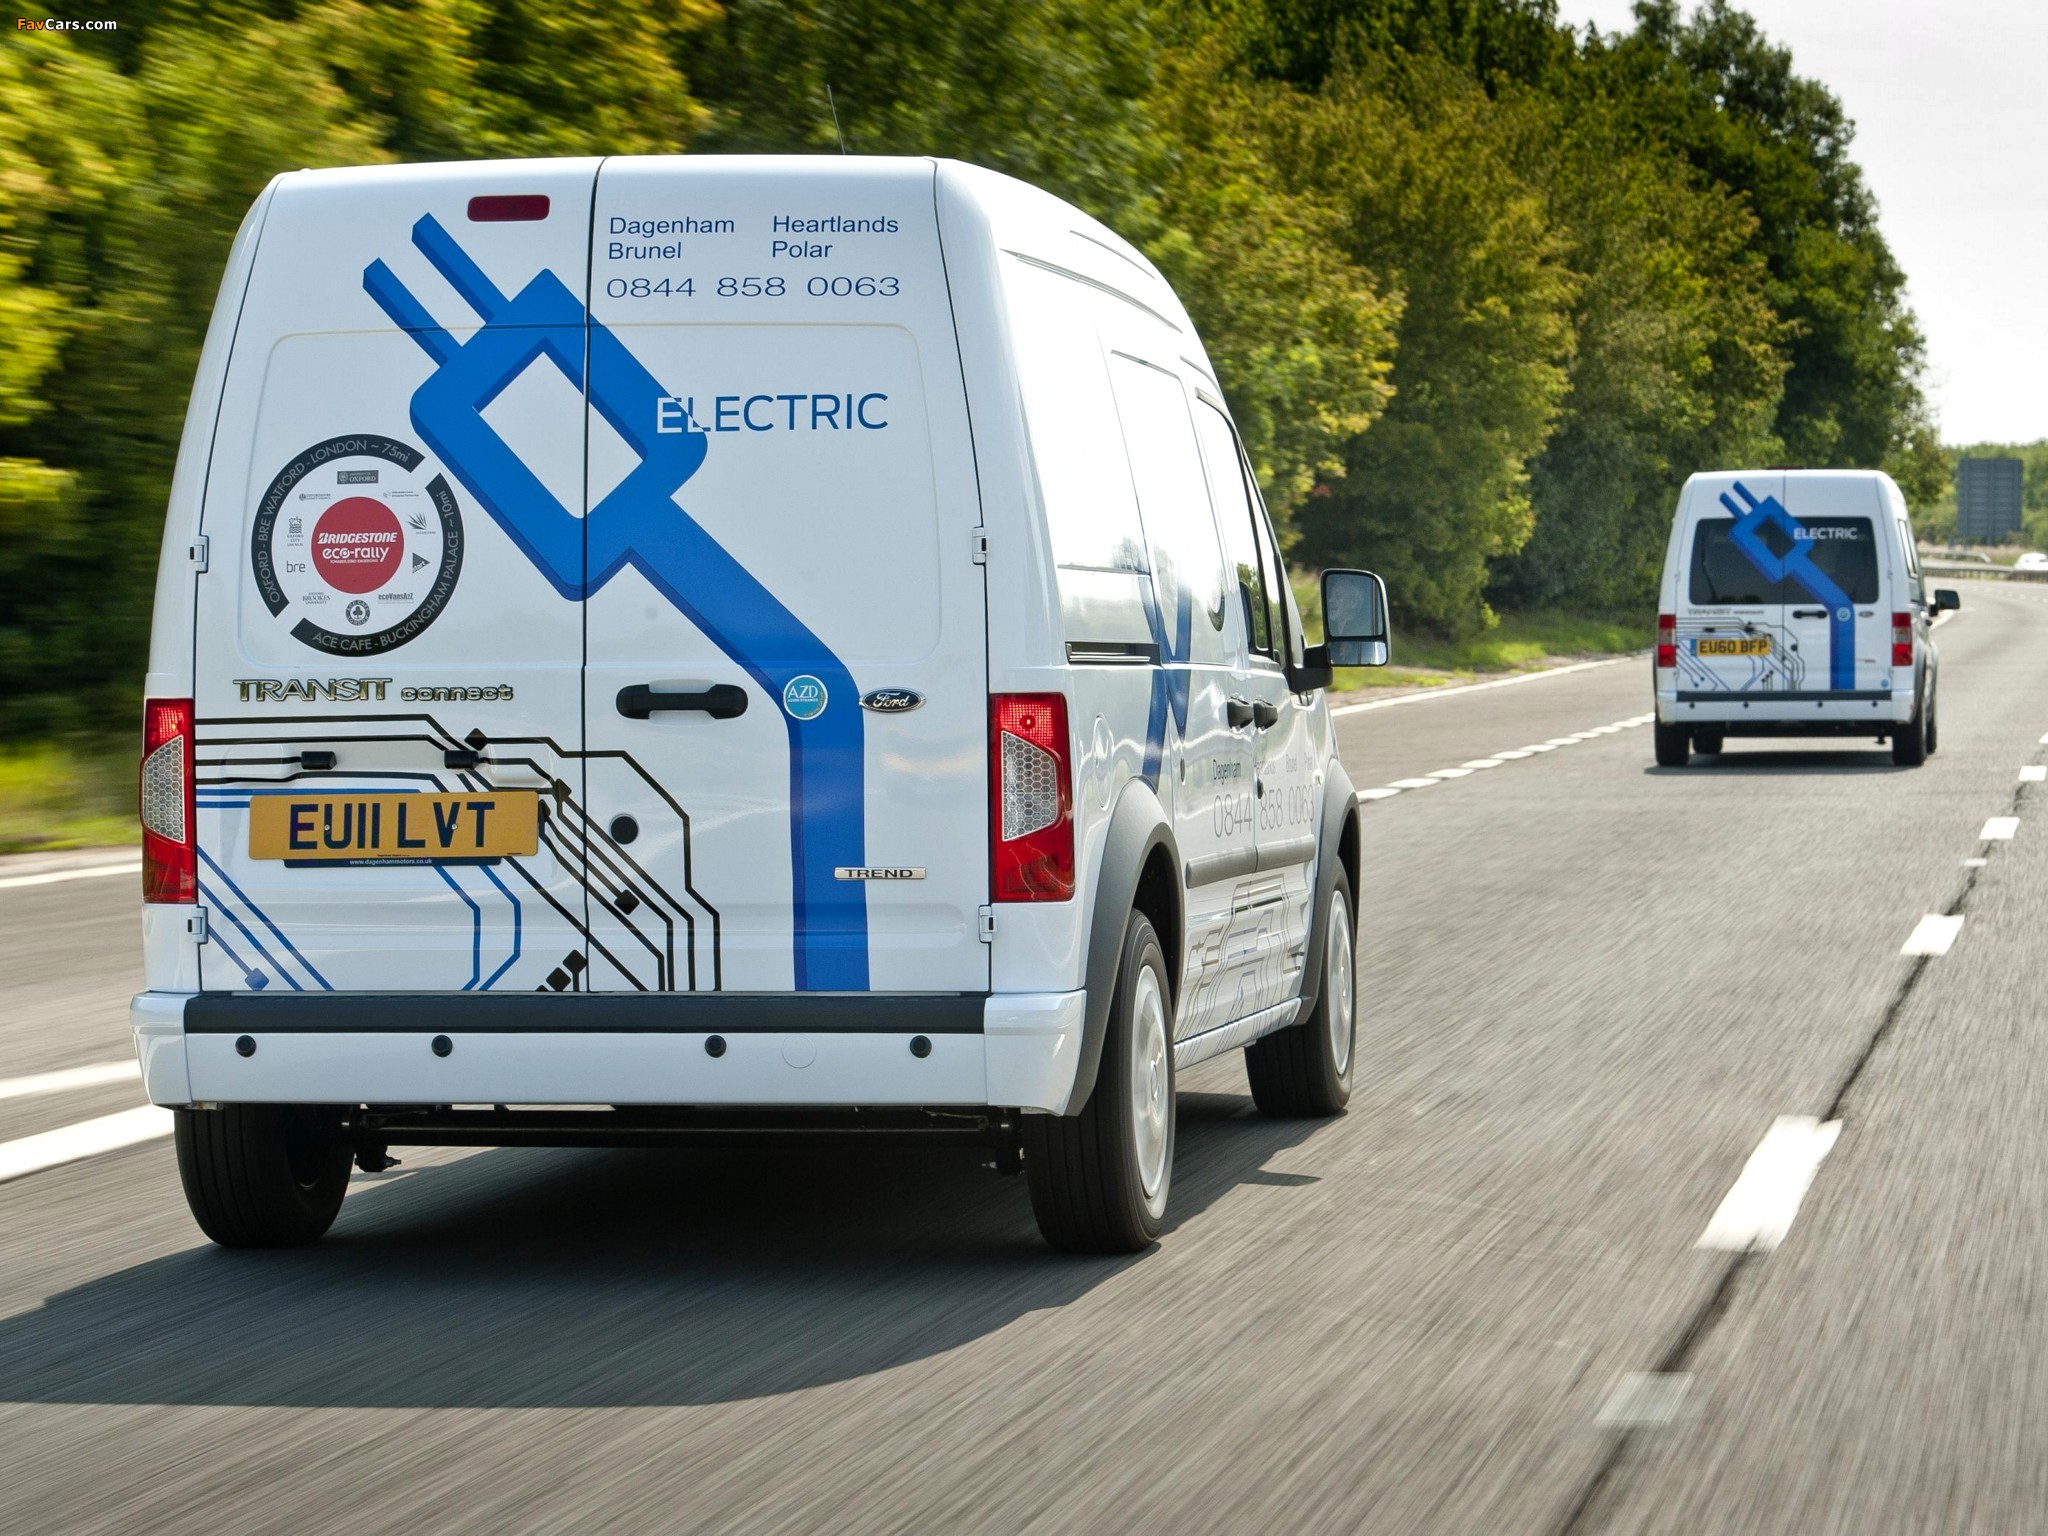 AZD Ford Transit Connect Electric 2011 wallpapers (2048 x 1536)